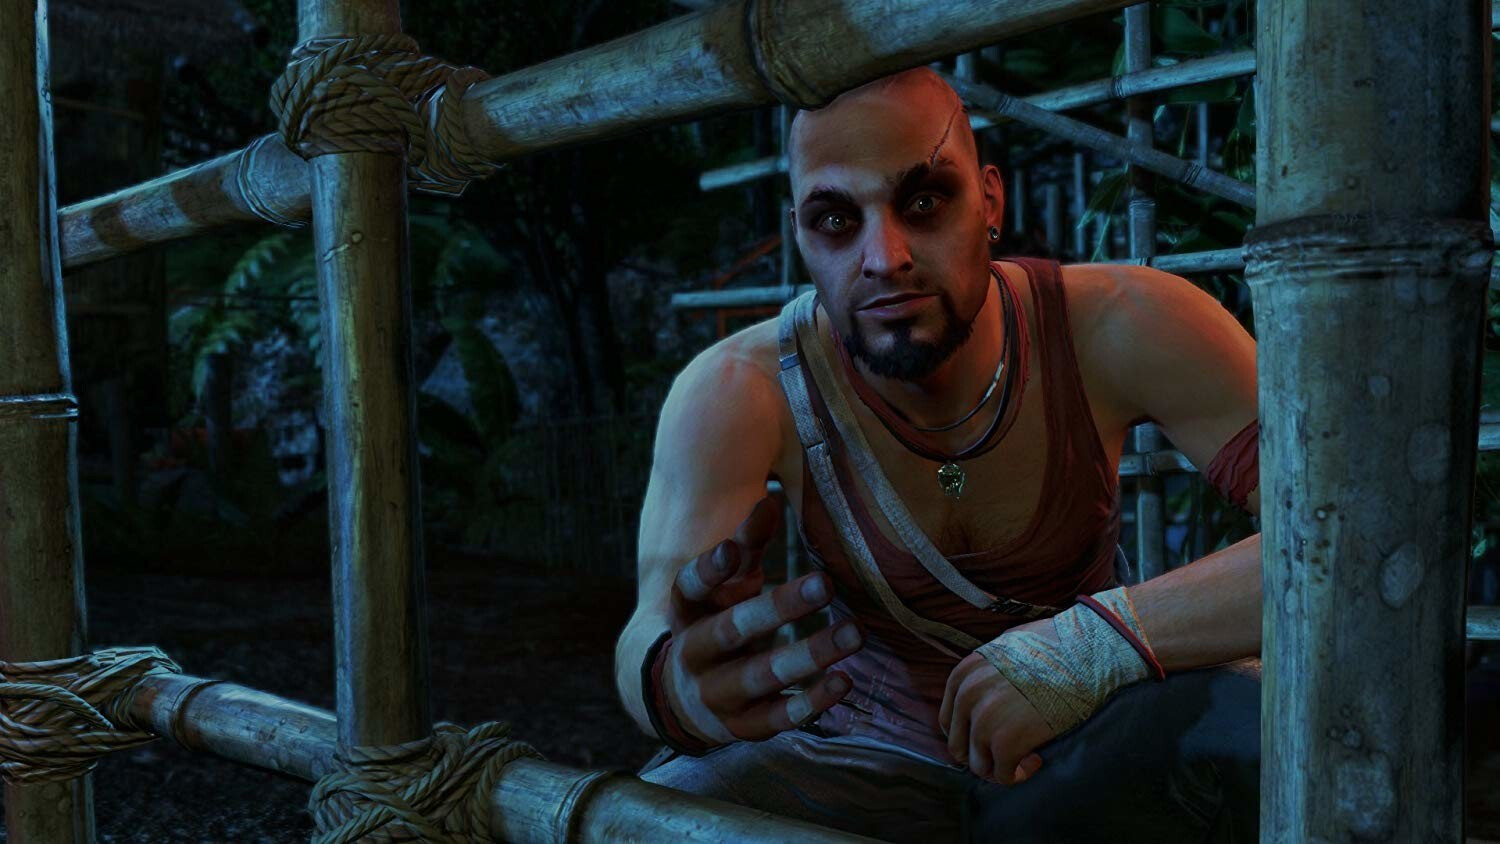 far cry 6 lost between worlds download